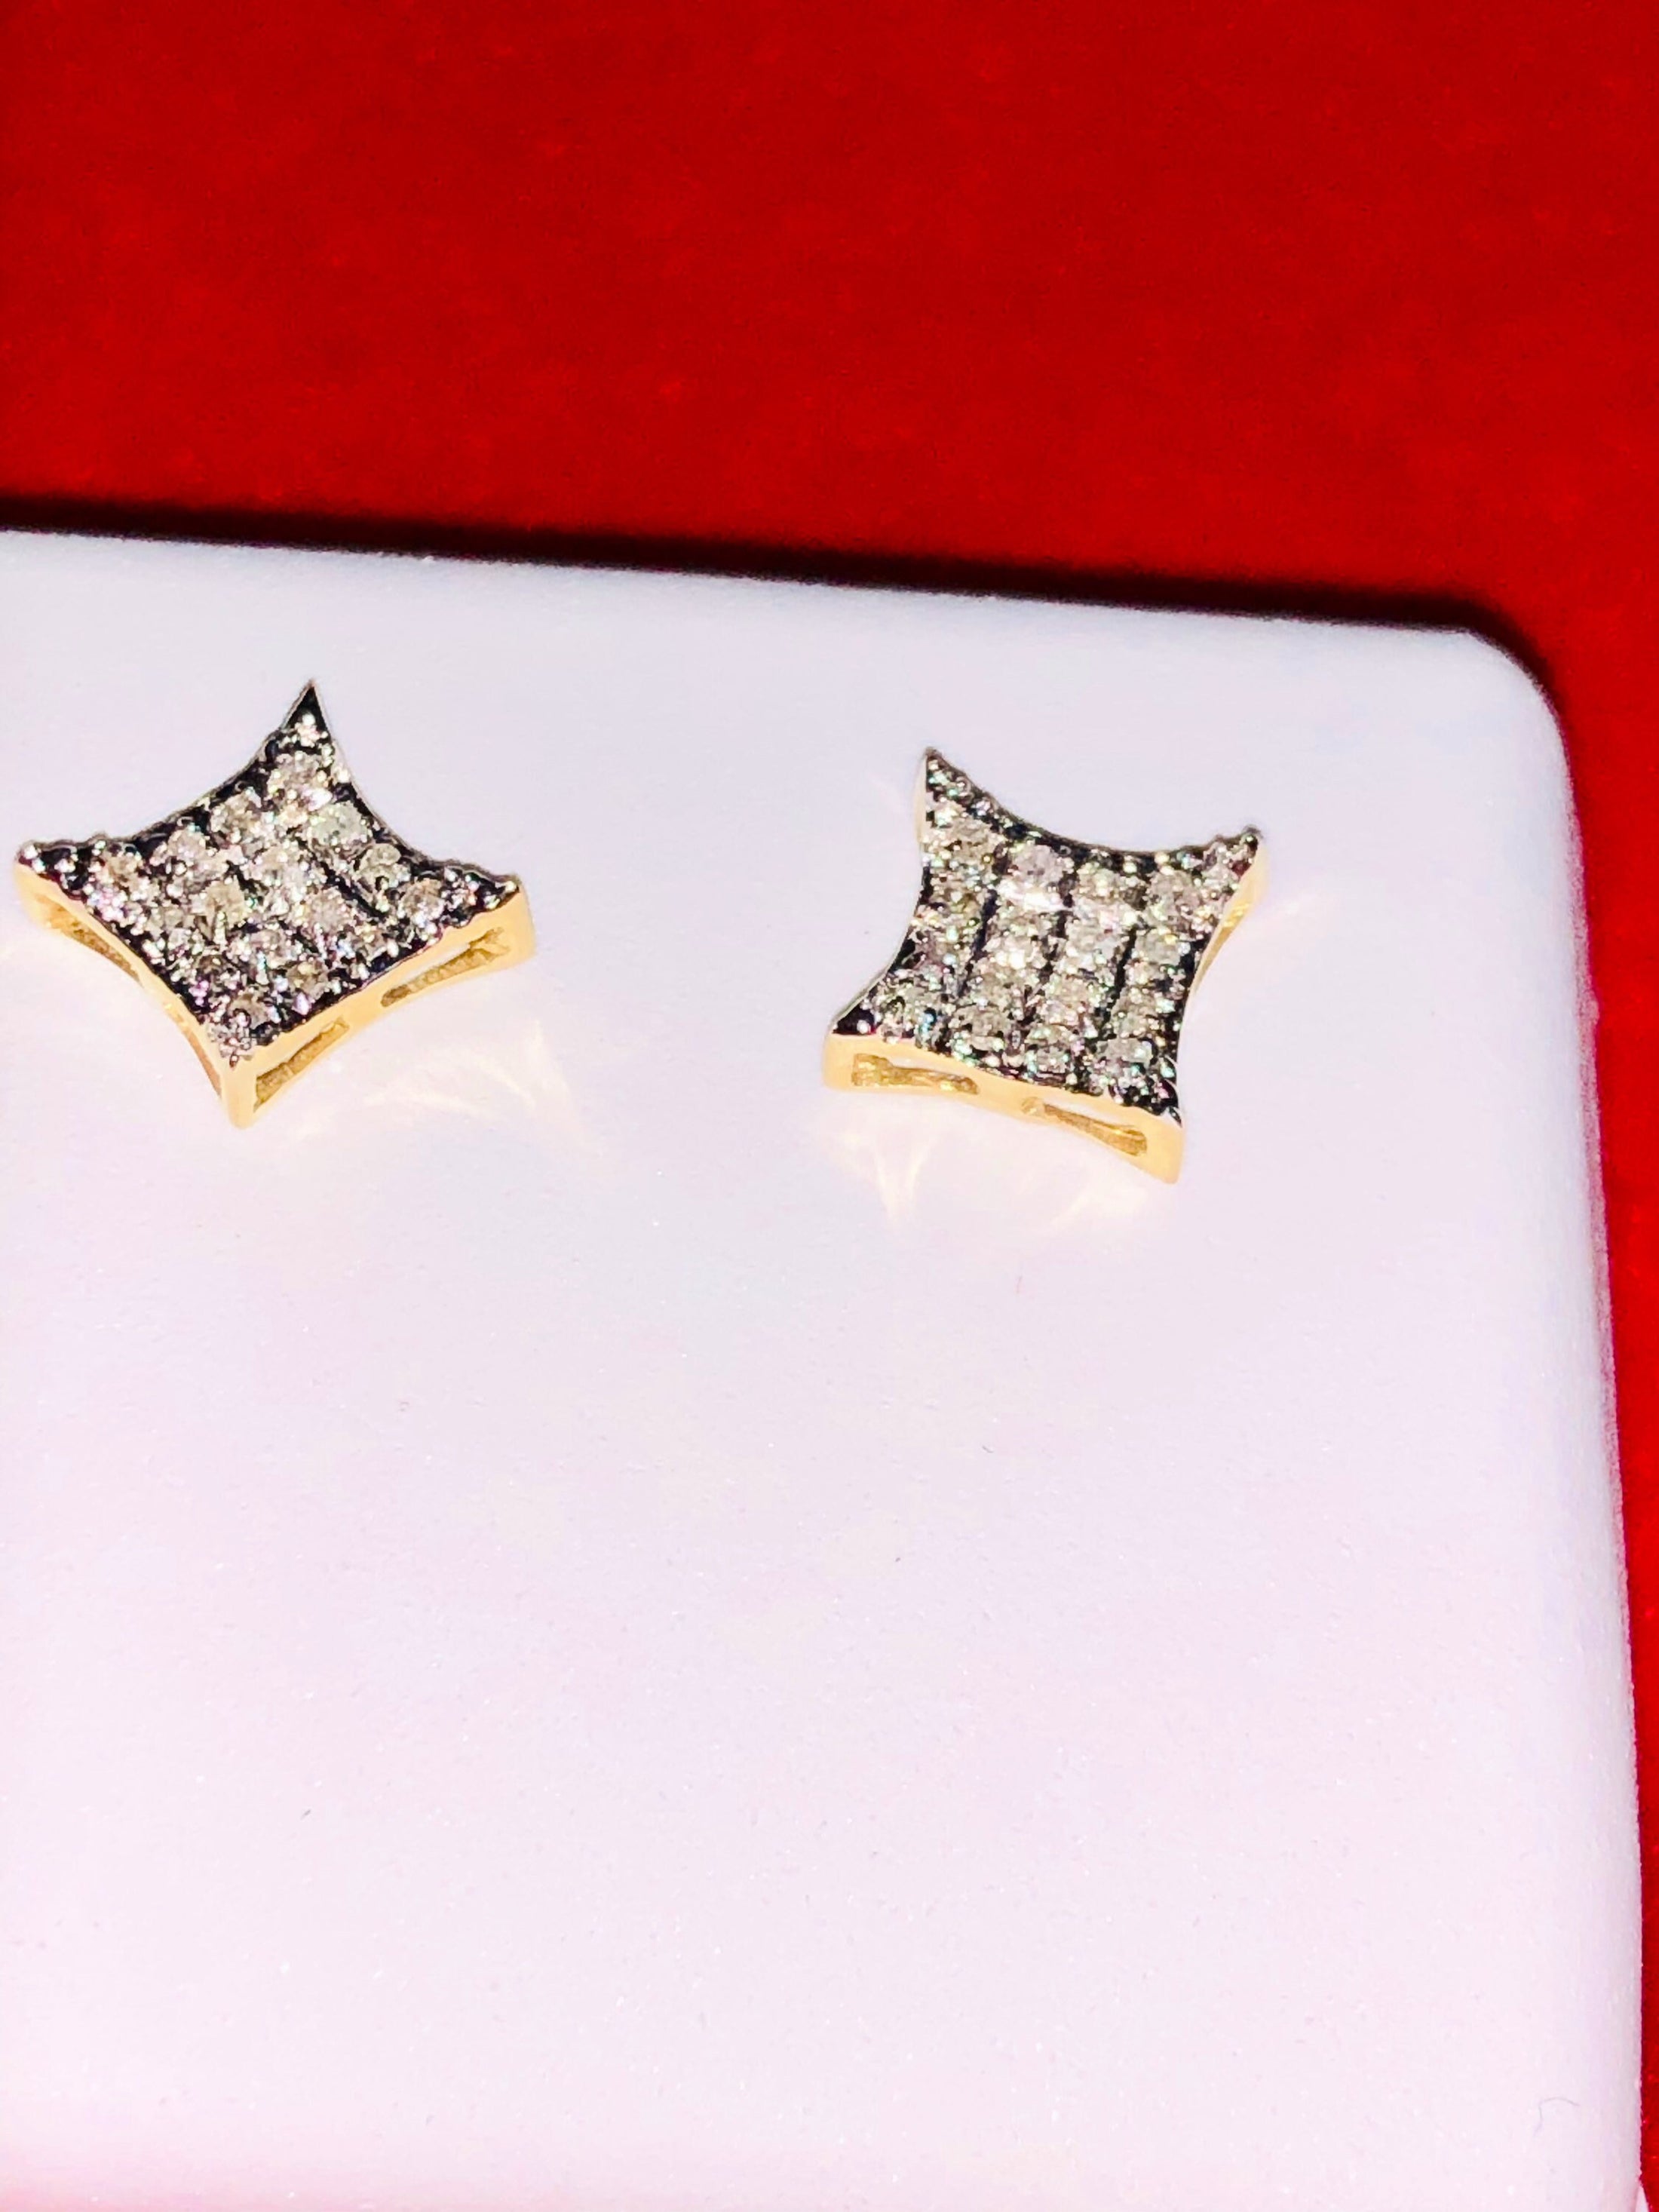 10k Real Gold Real Diamond earrings, Free Appraisal, 10k solid gold screw back studs, not plated not lab made, best Christmas occasions, HOT